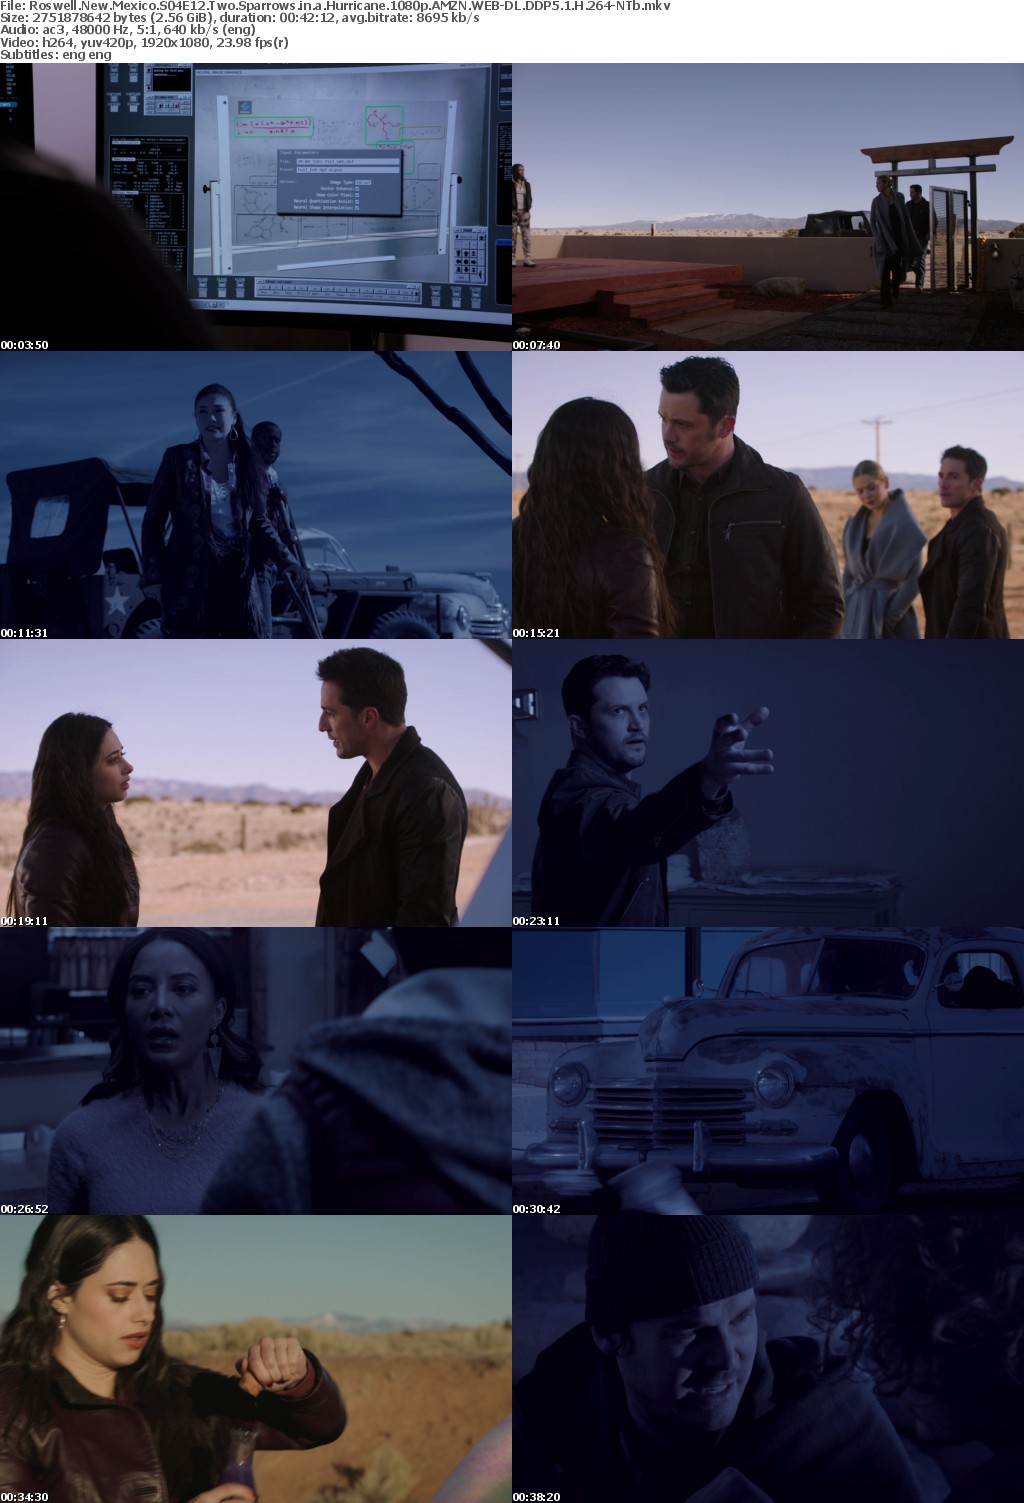 Roswell New Mexico S04E12 Two Sparrows in a Hurricane 1080p AMZN WEBRip DDP5 1 x264-NTb